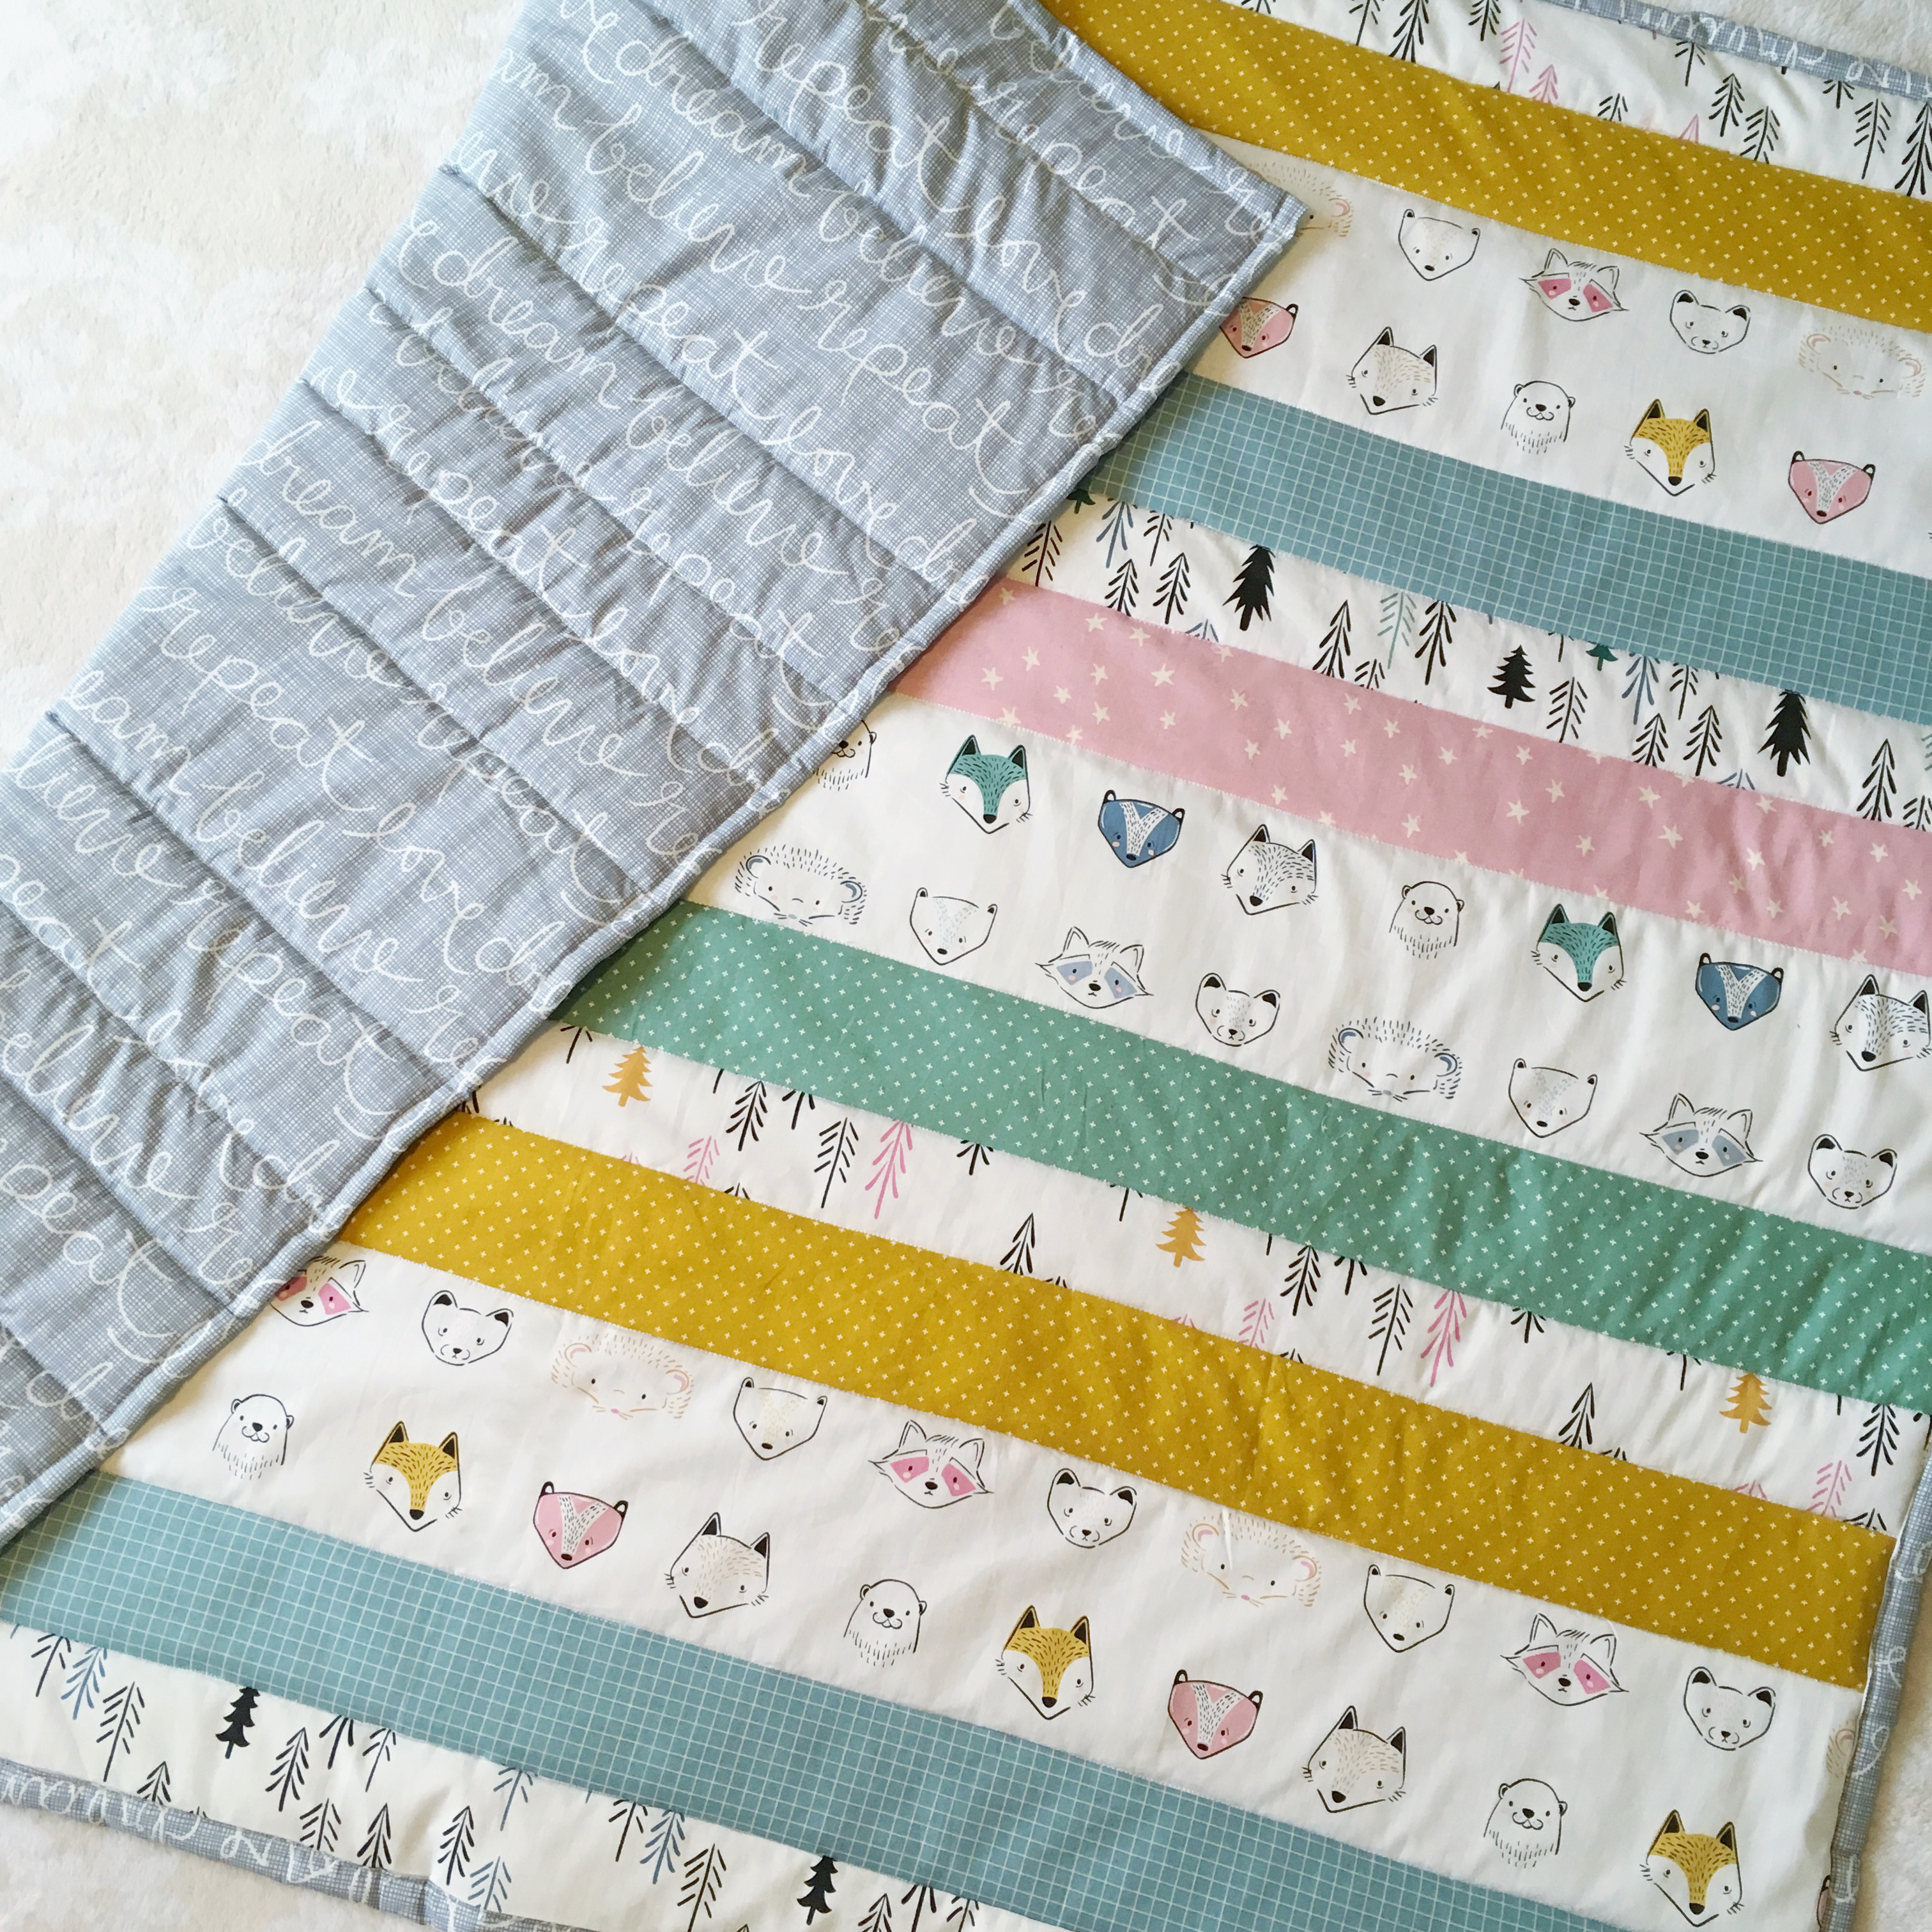 Modern patchwork and quilting fabric at The Fabric Fox